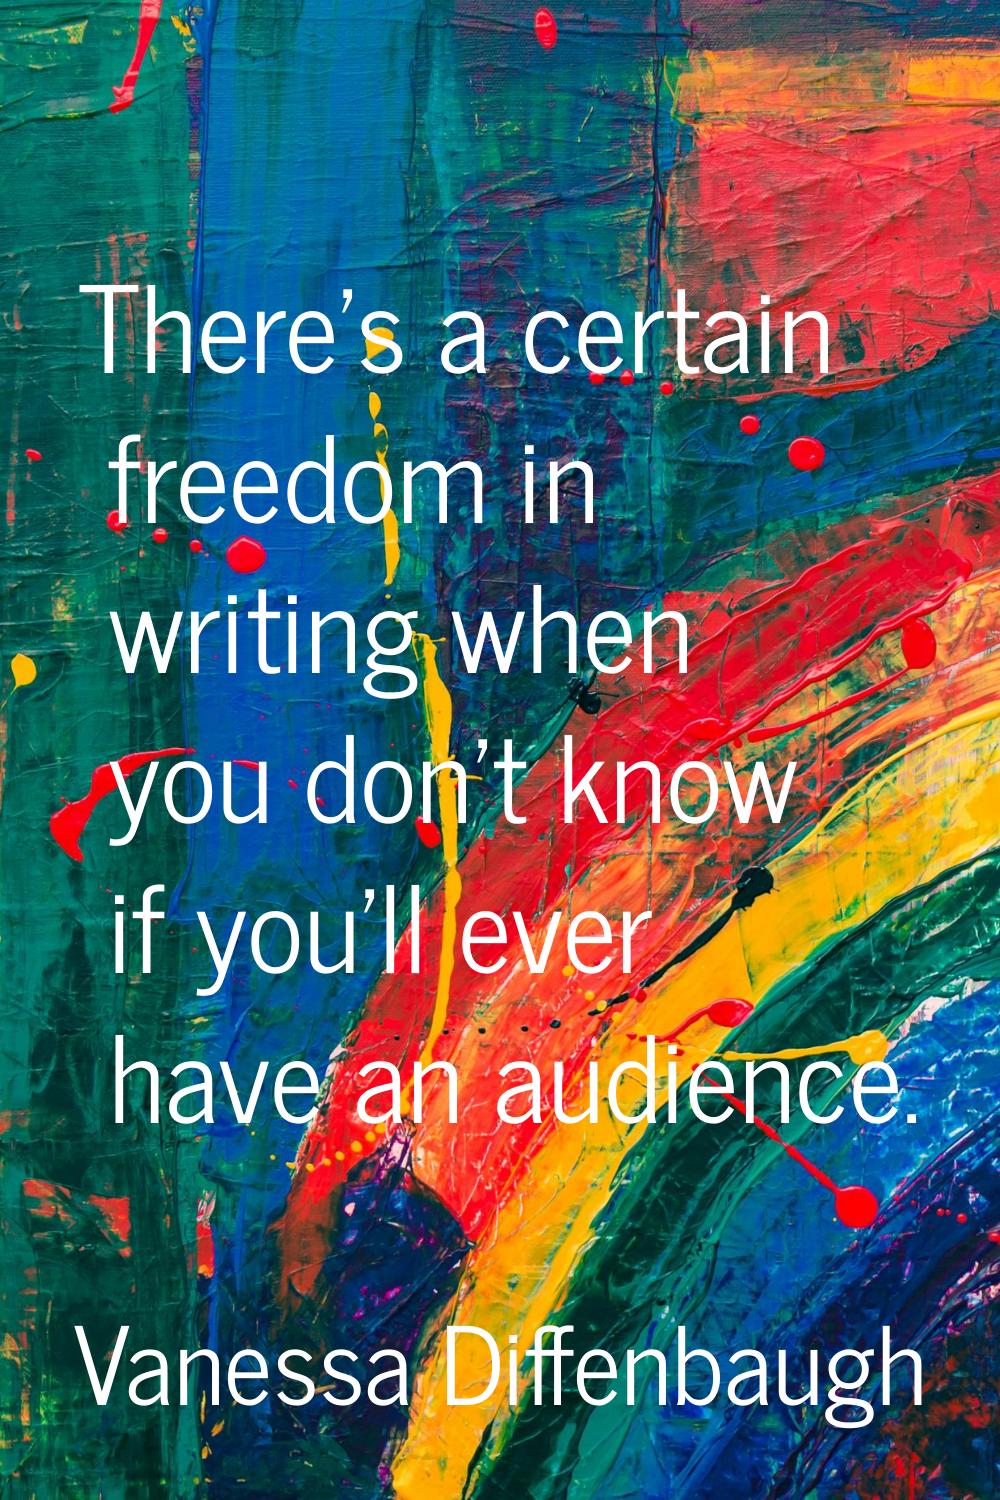 There's a certain freedom in writing when you don't know if you'll ever have an audience.